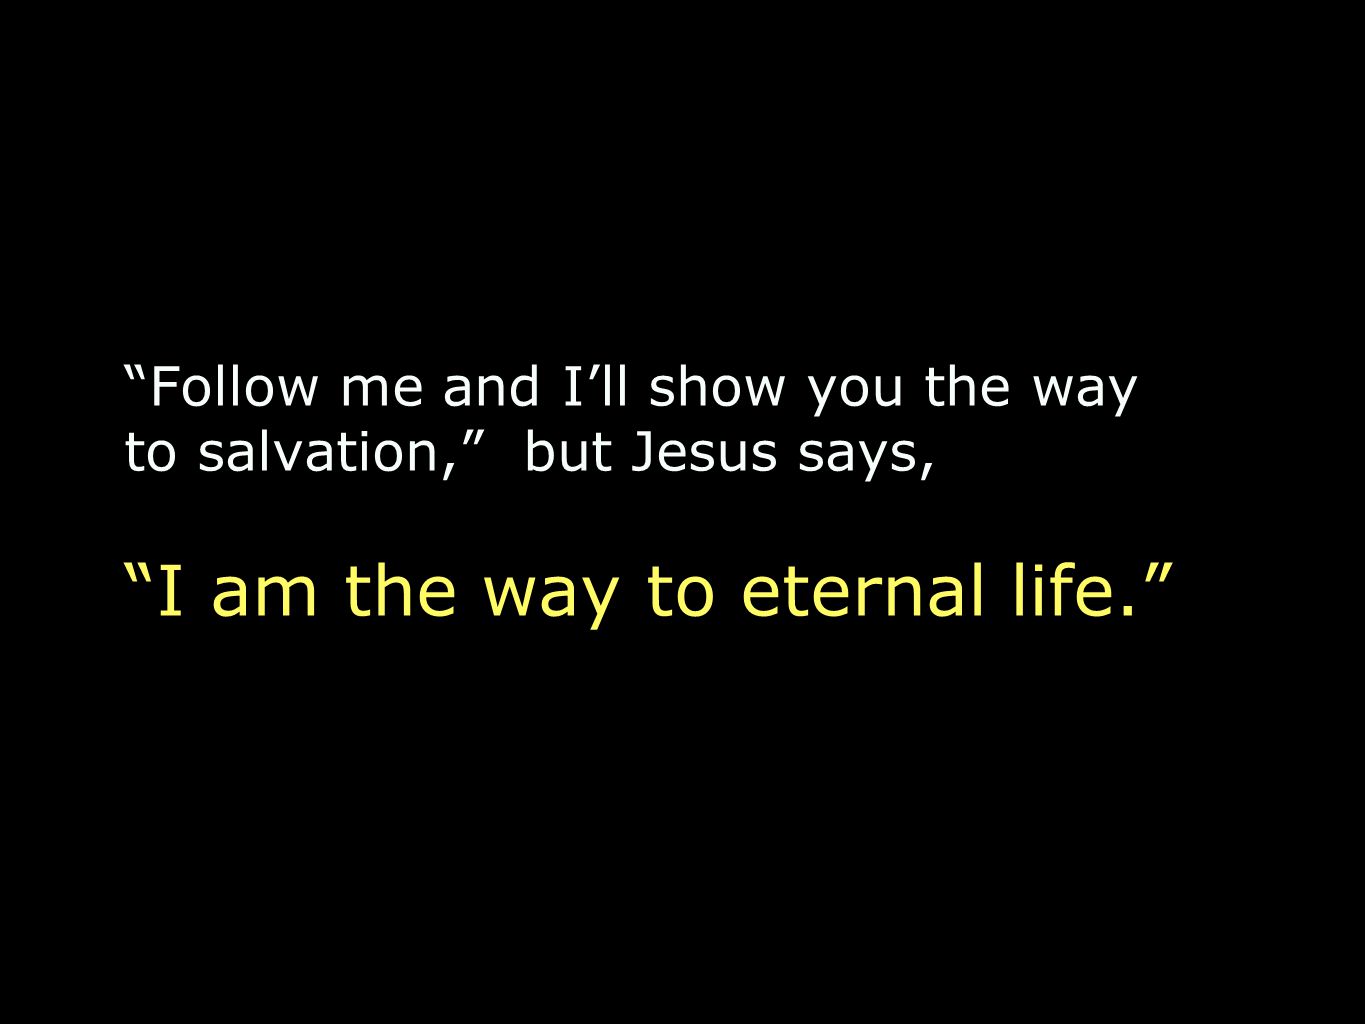 I am the way to eternal life.